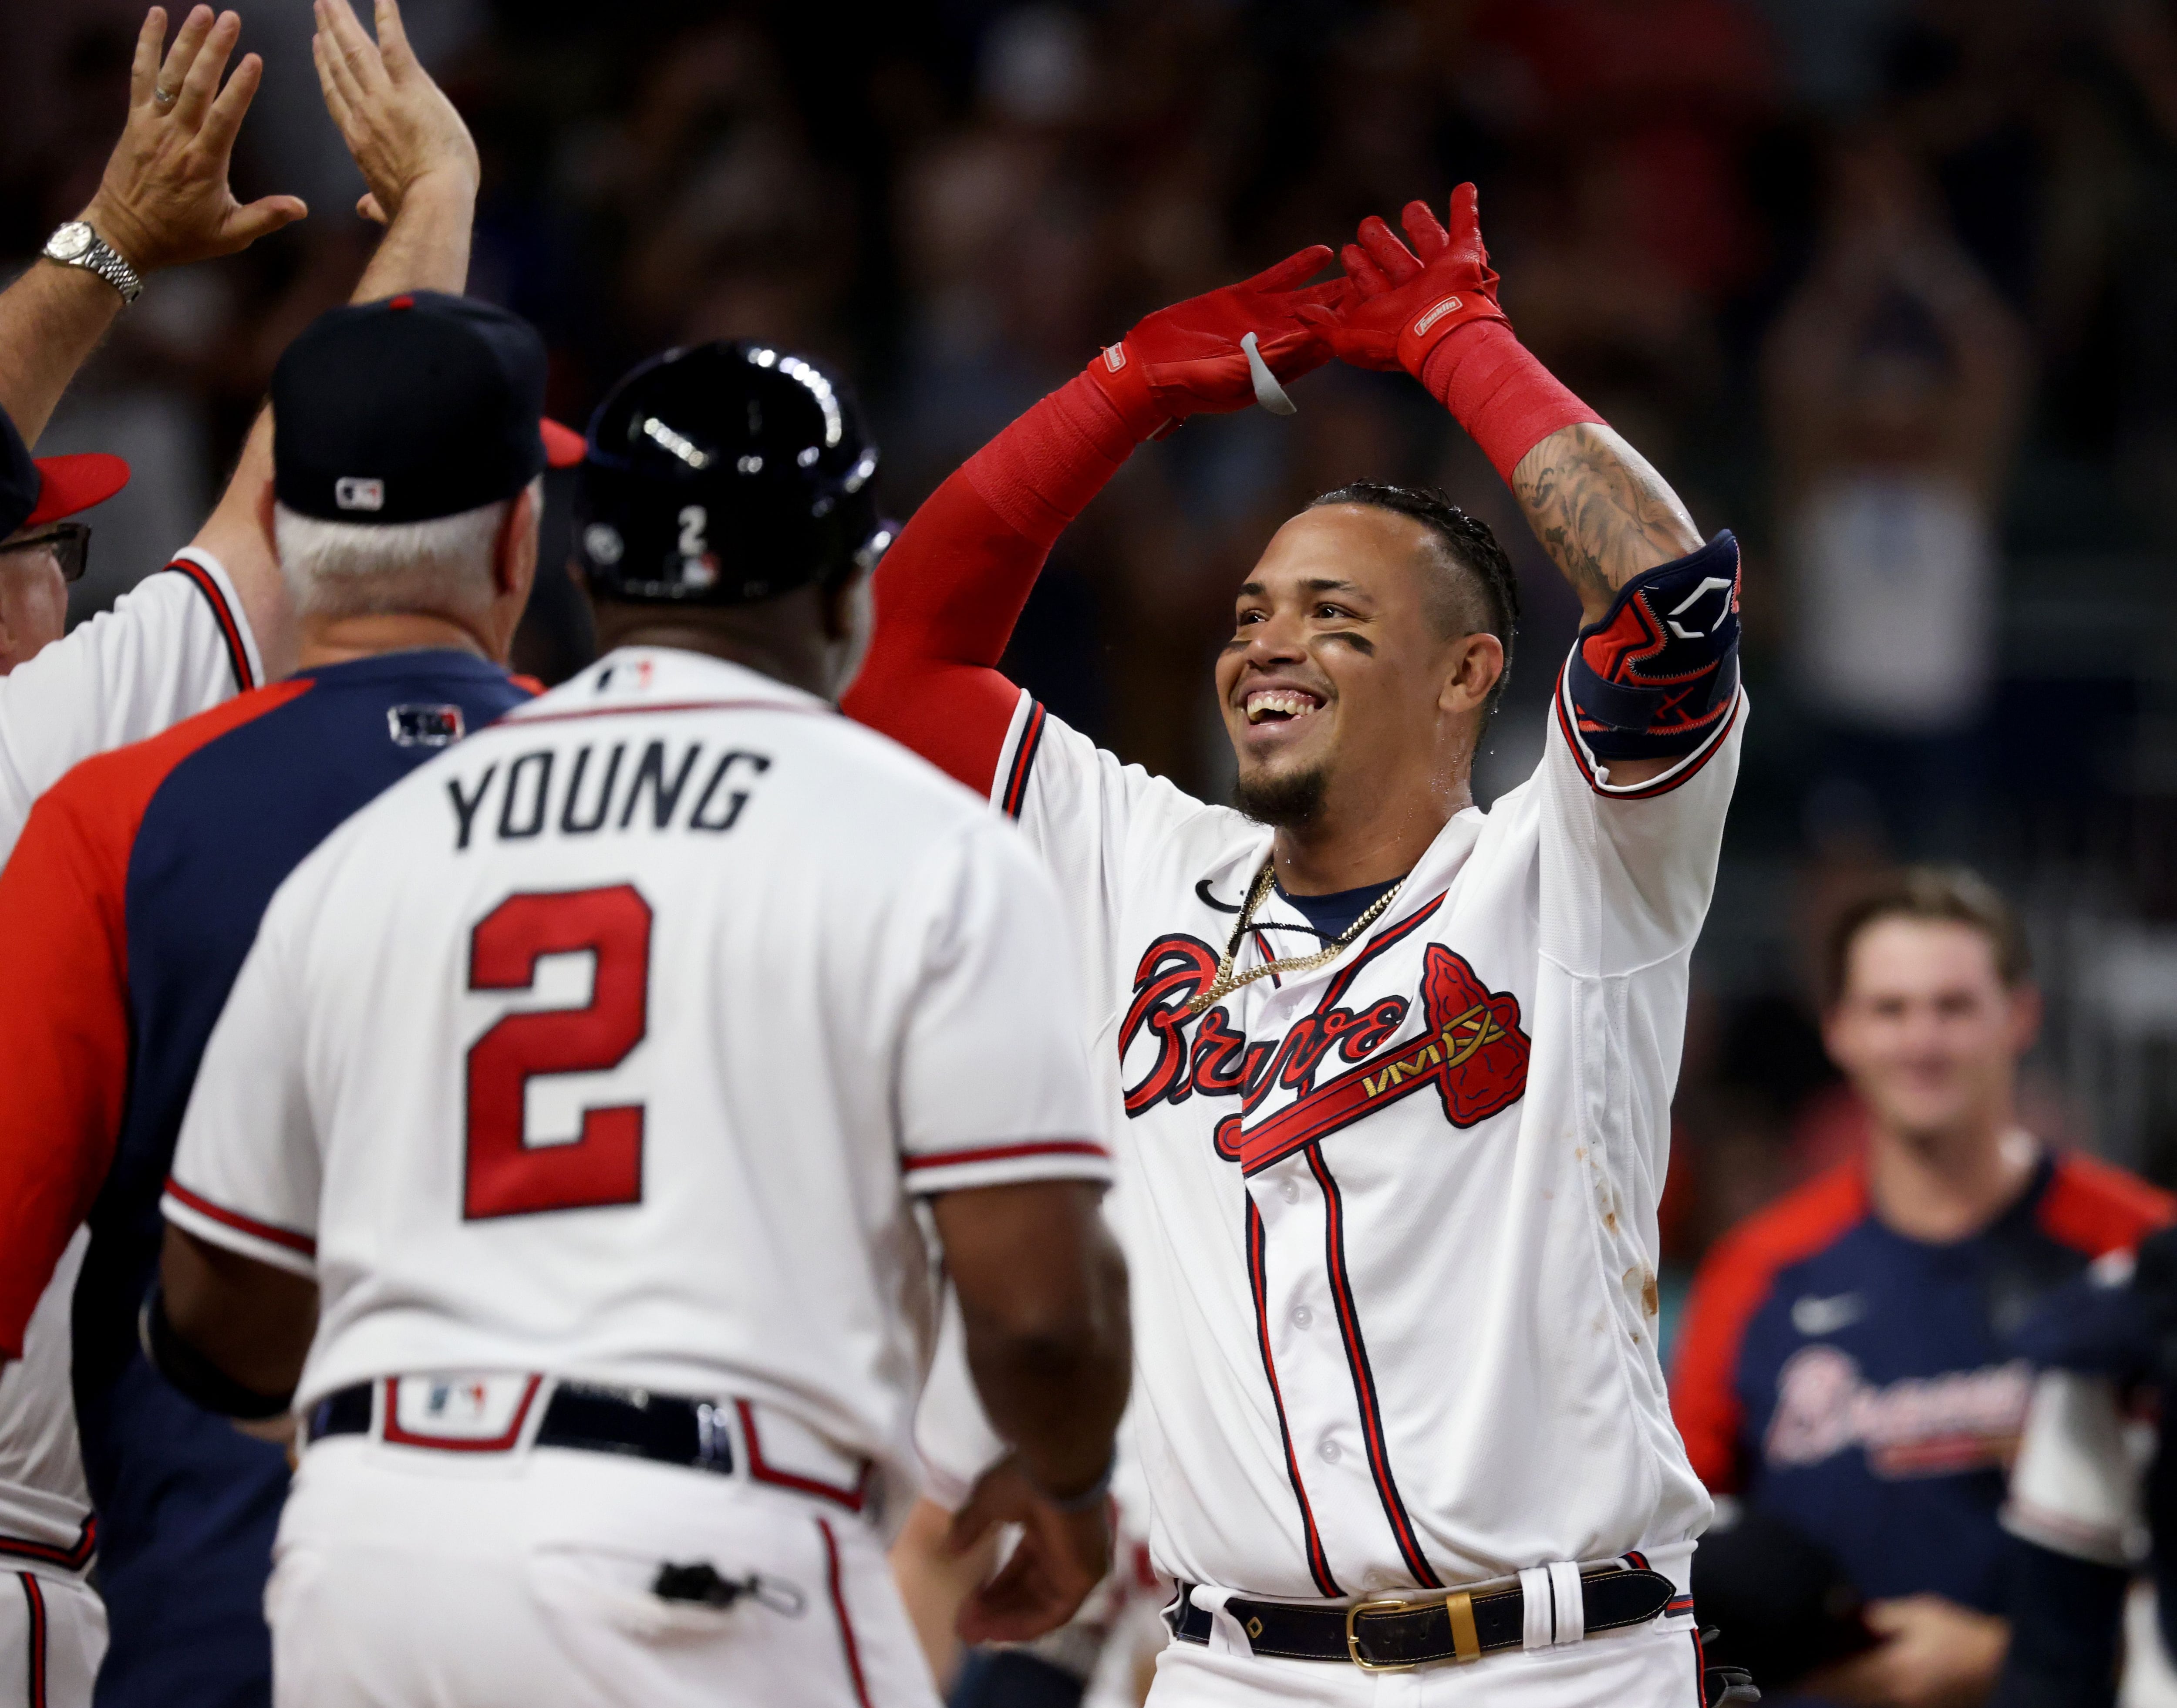 Orlando Arcia hits a walk-off homer in 5-3 Braves win - Battery Power